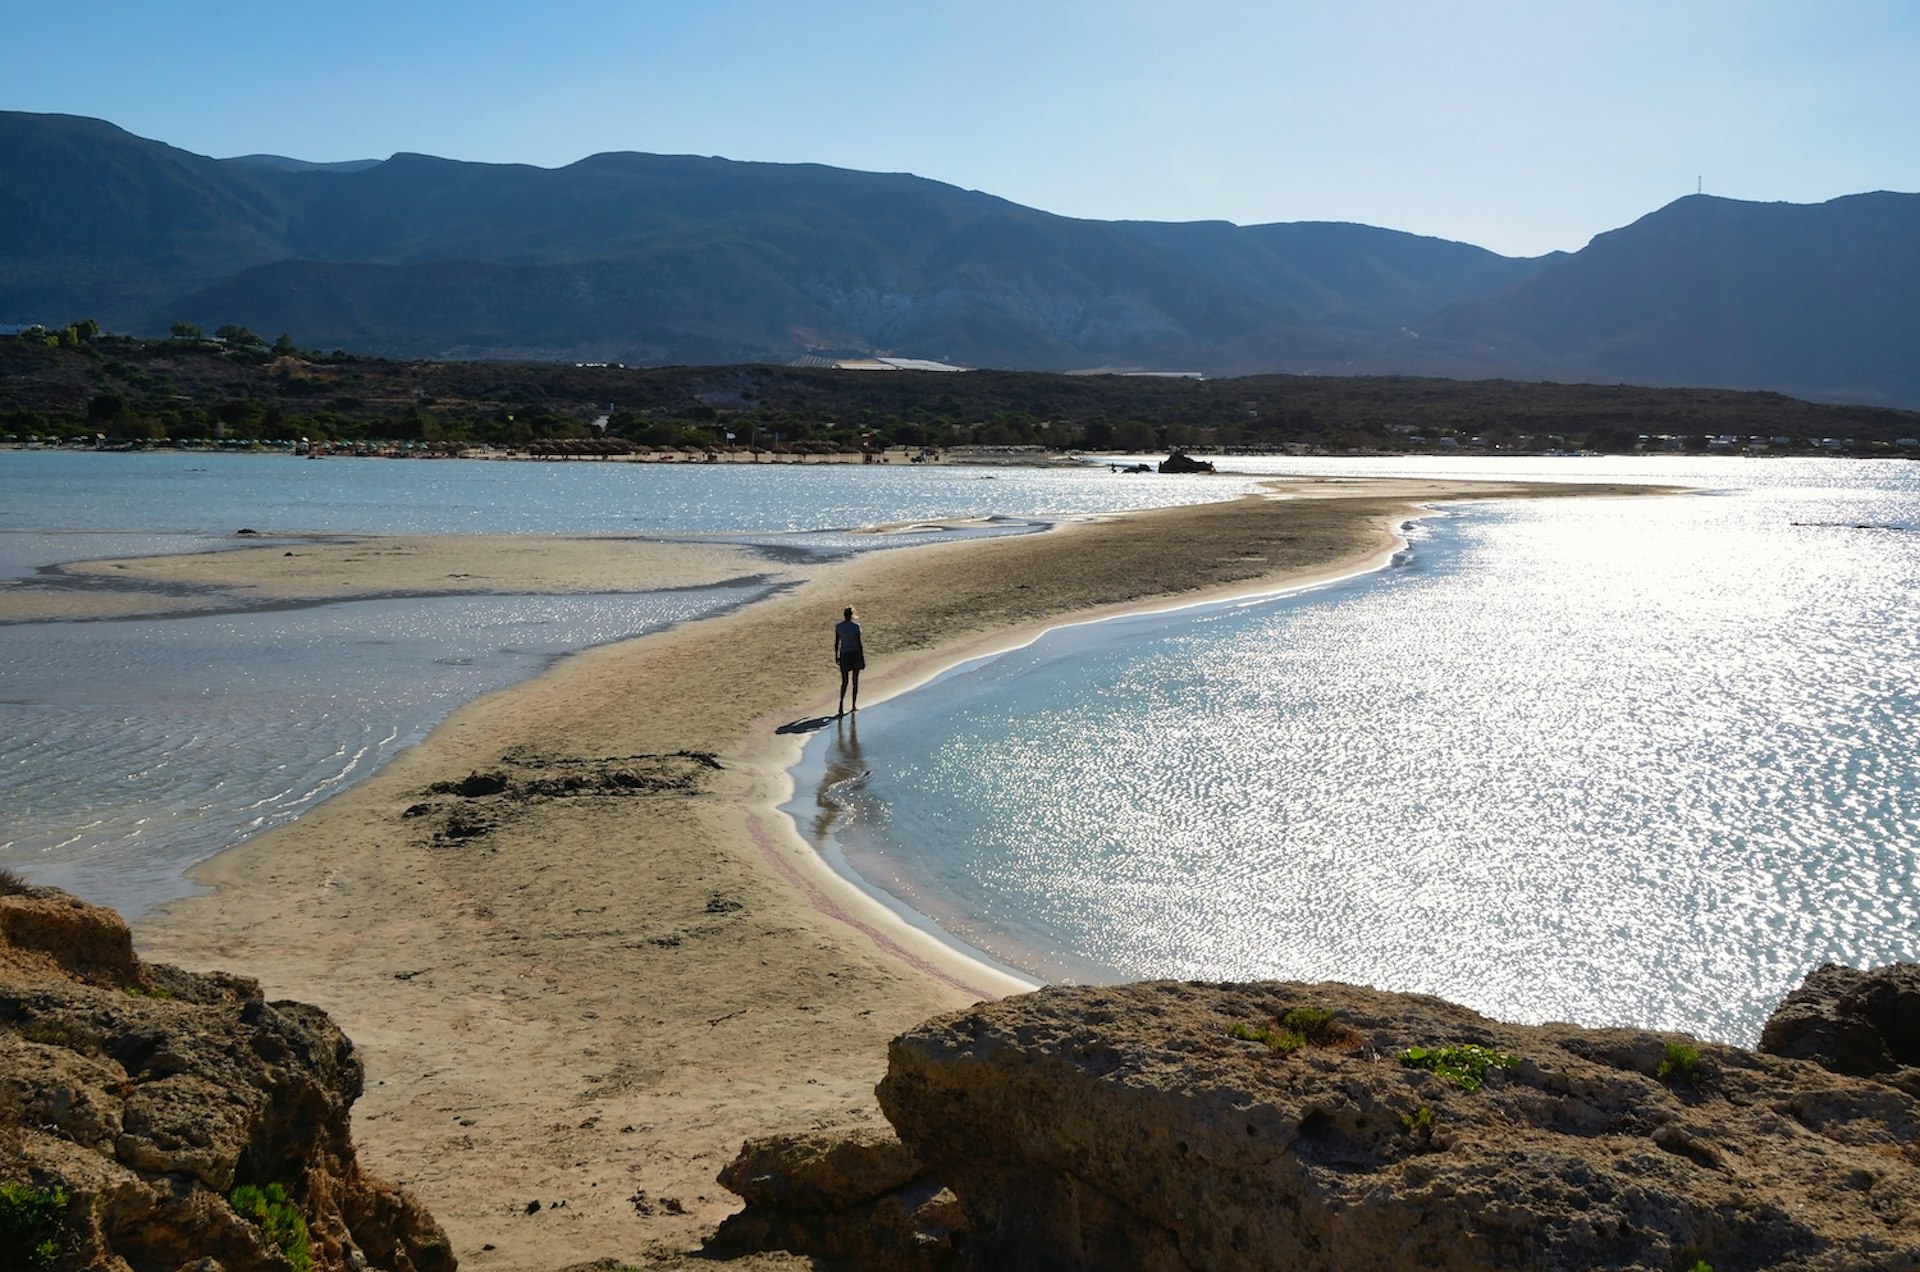 A person walks across the sandy isthmus connecting Elafonisi Beach and Elafonisi Islet, Crete, Greece